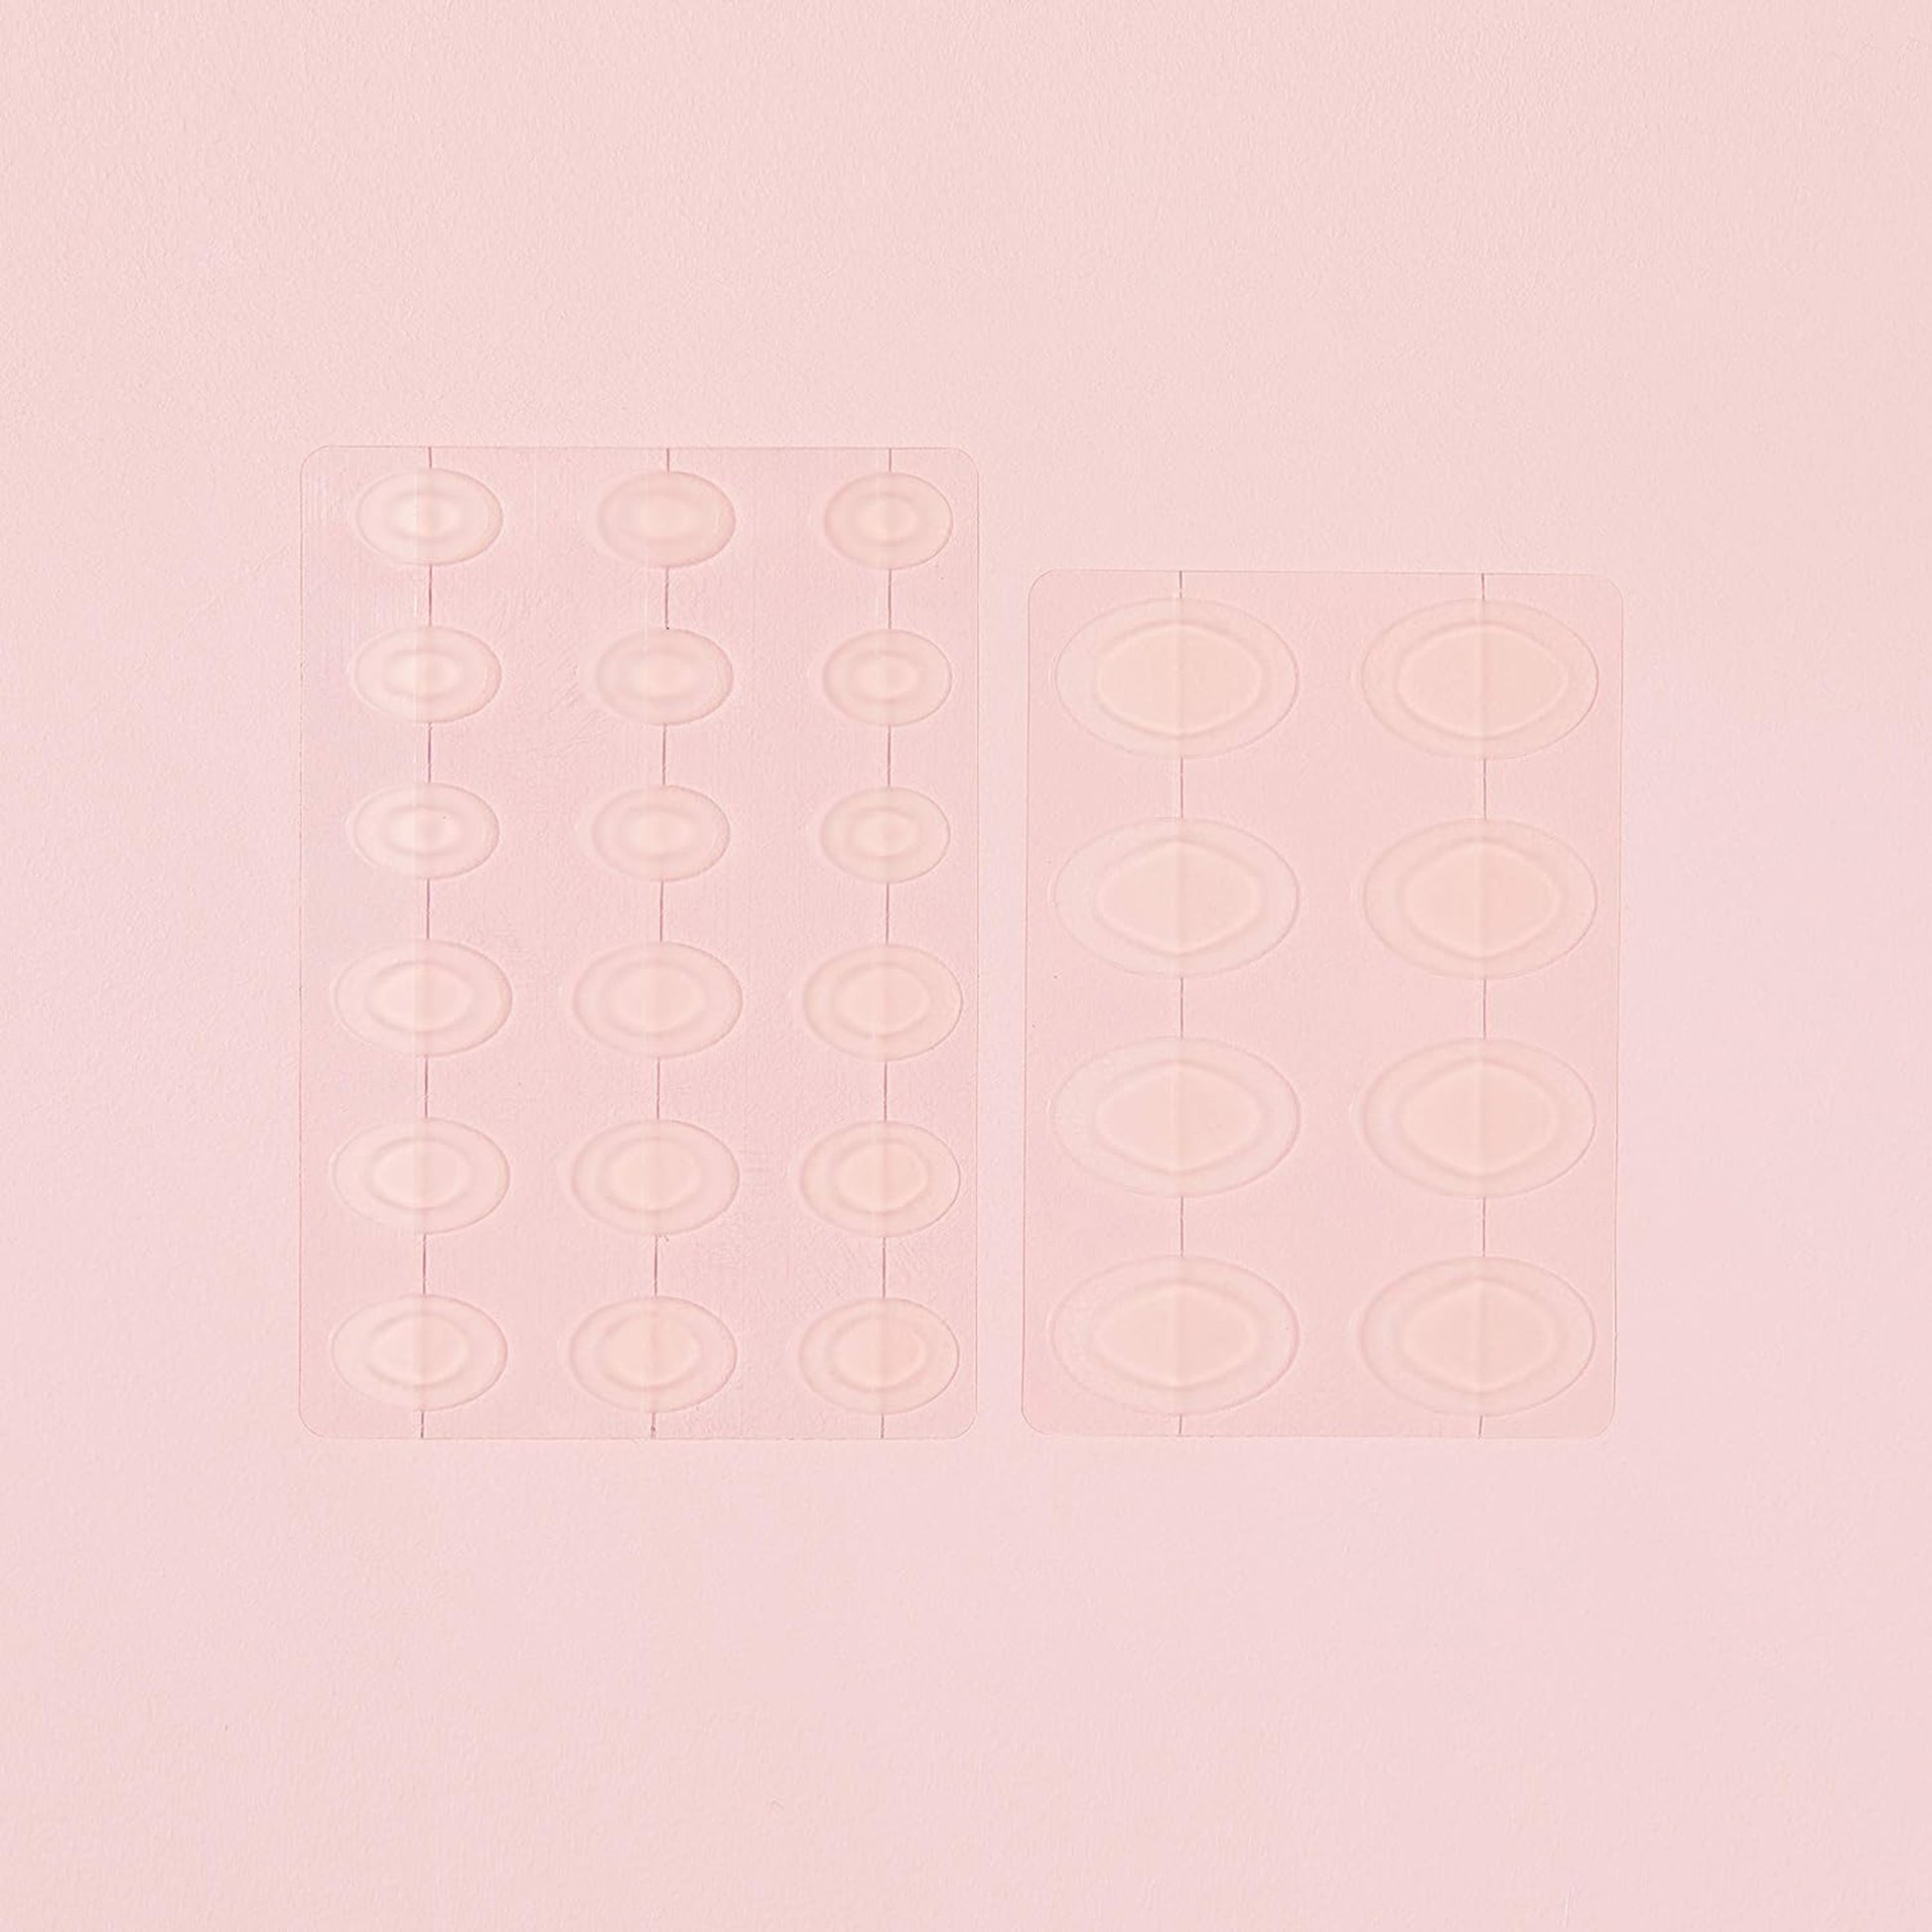 Cosrx AC Collection Acne Patch 26 Patches